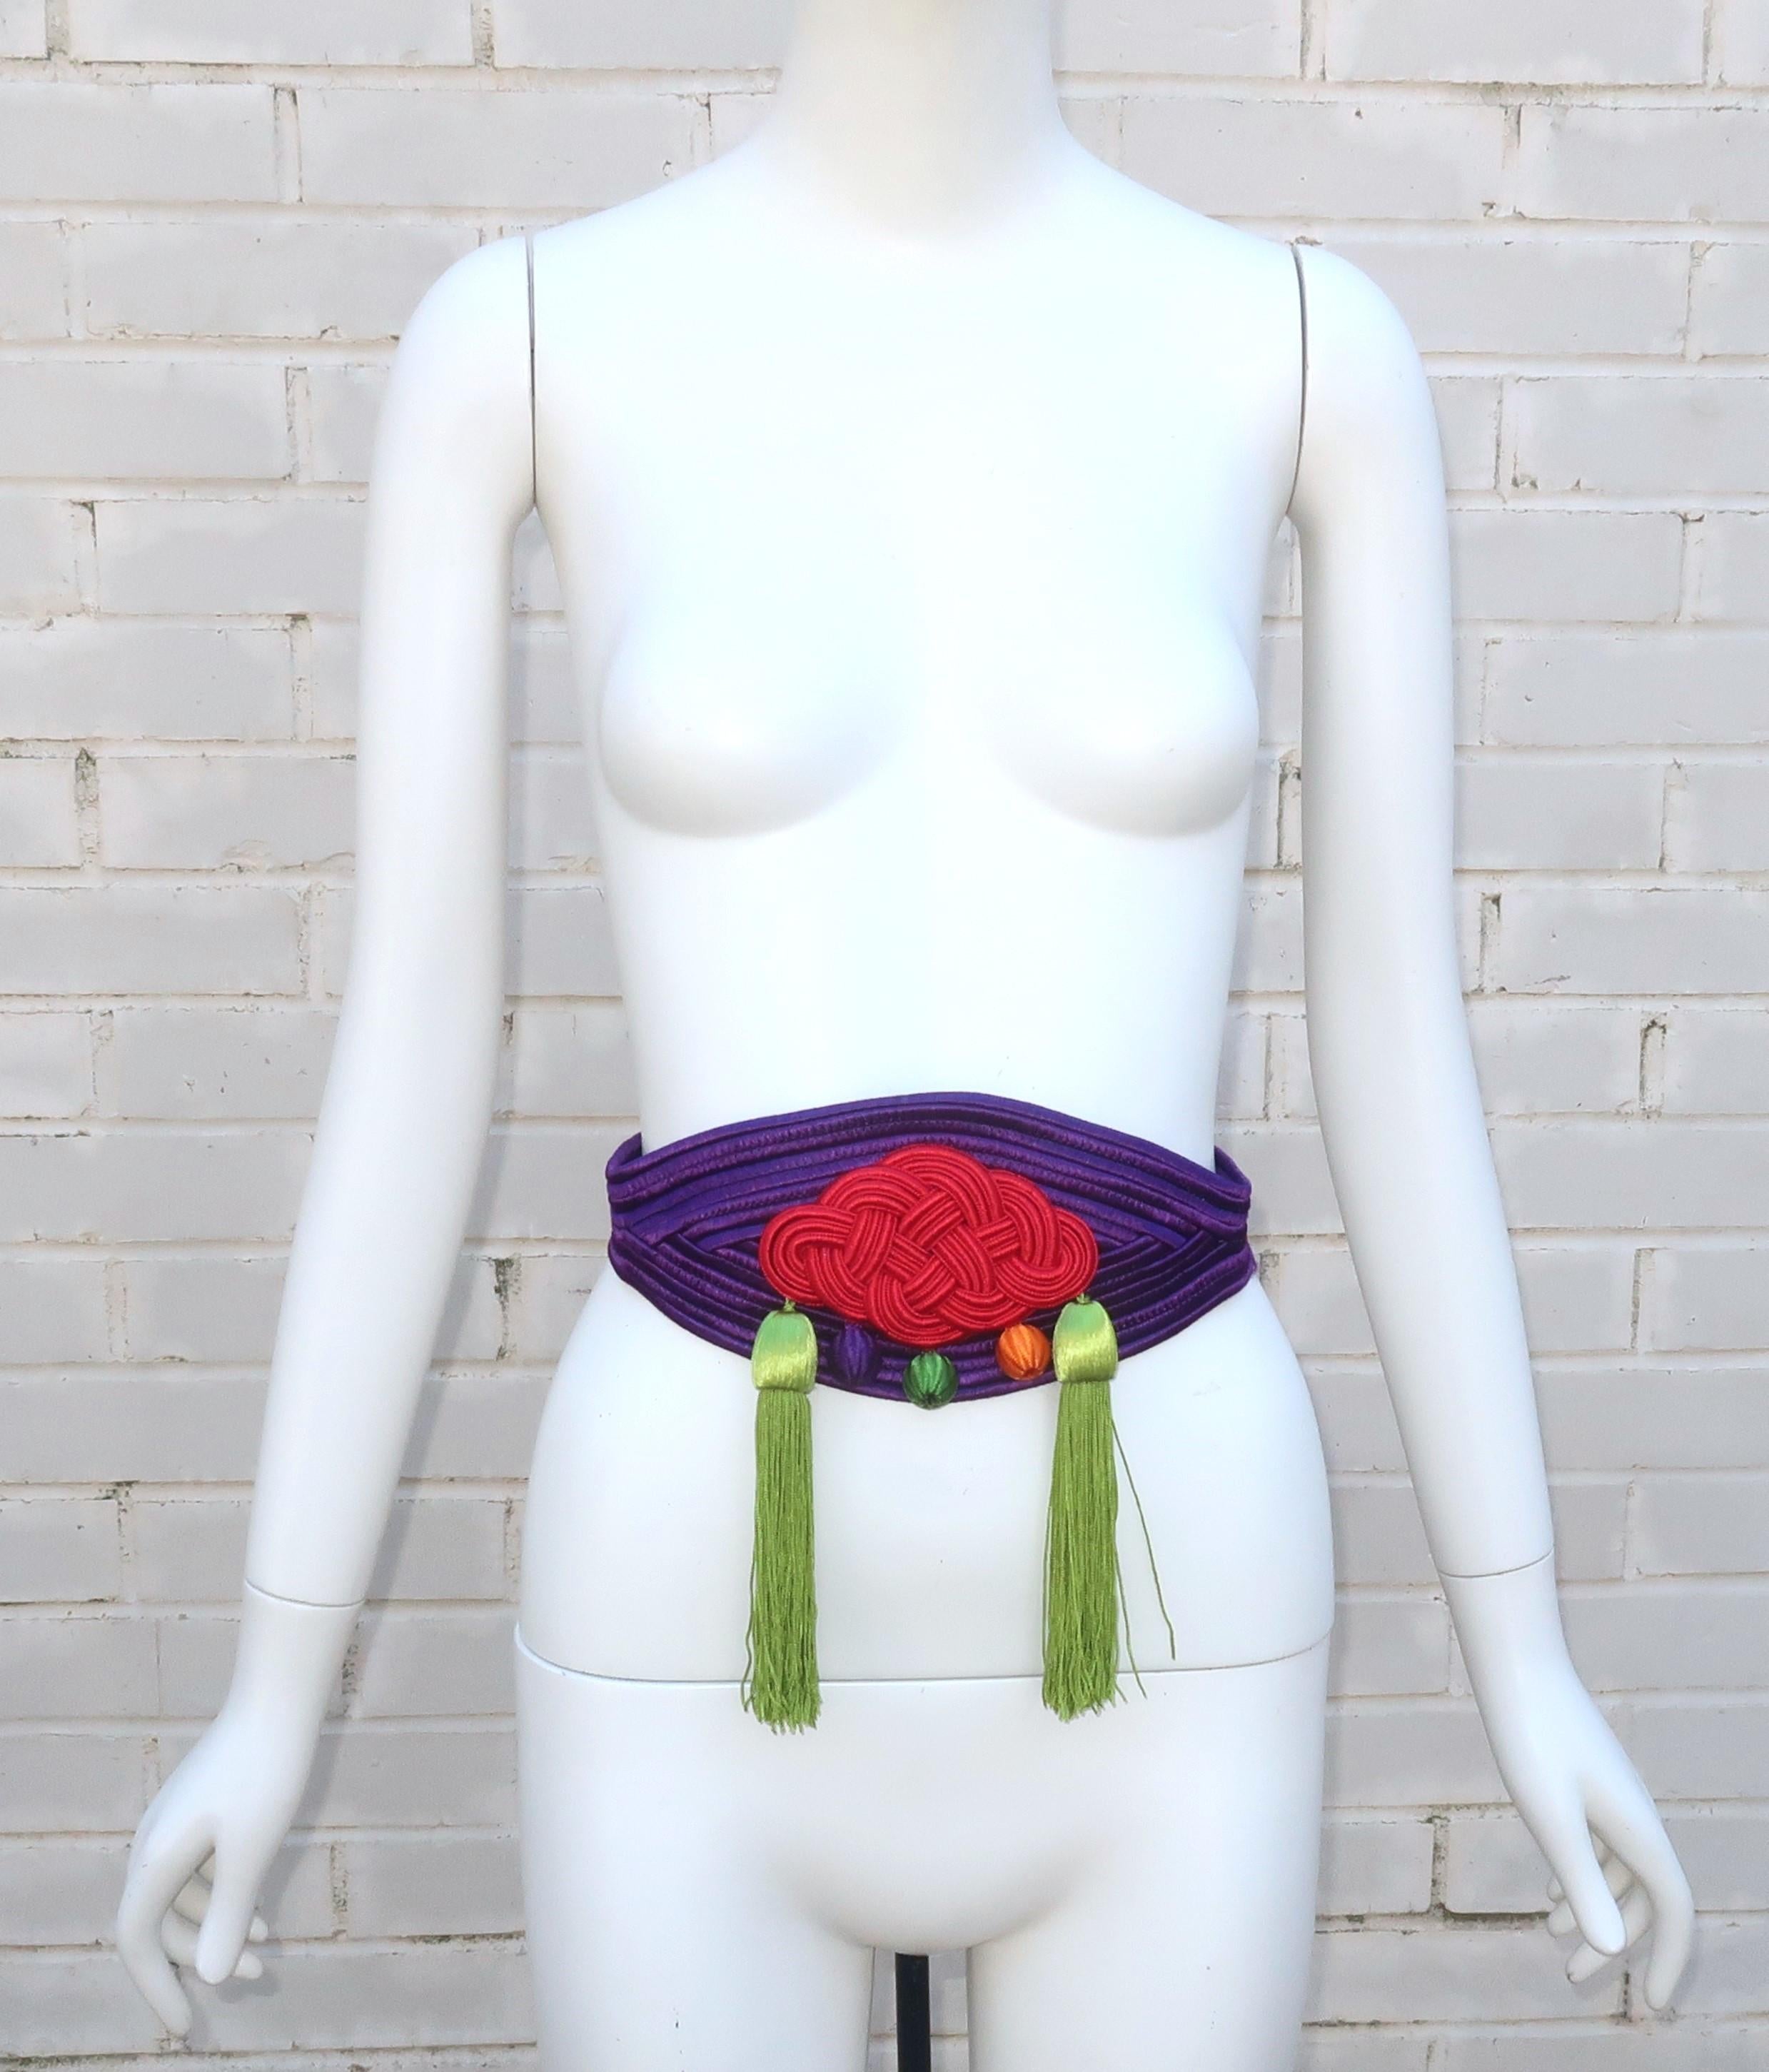 Vintage Yves Saint Laurent cummerbund style belt designed in silk passementerie with tassels.  The opulent look is pure YSL with an eye catching combination of colors including royal purple, red, green, orange and lime green.  The belt hooks and